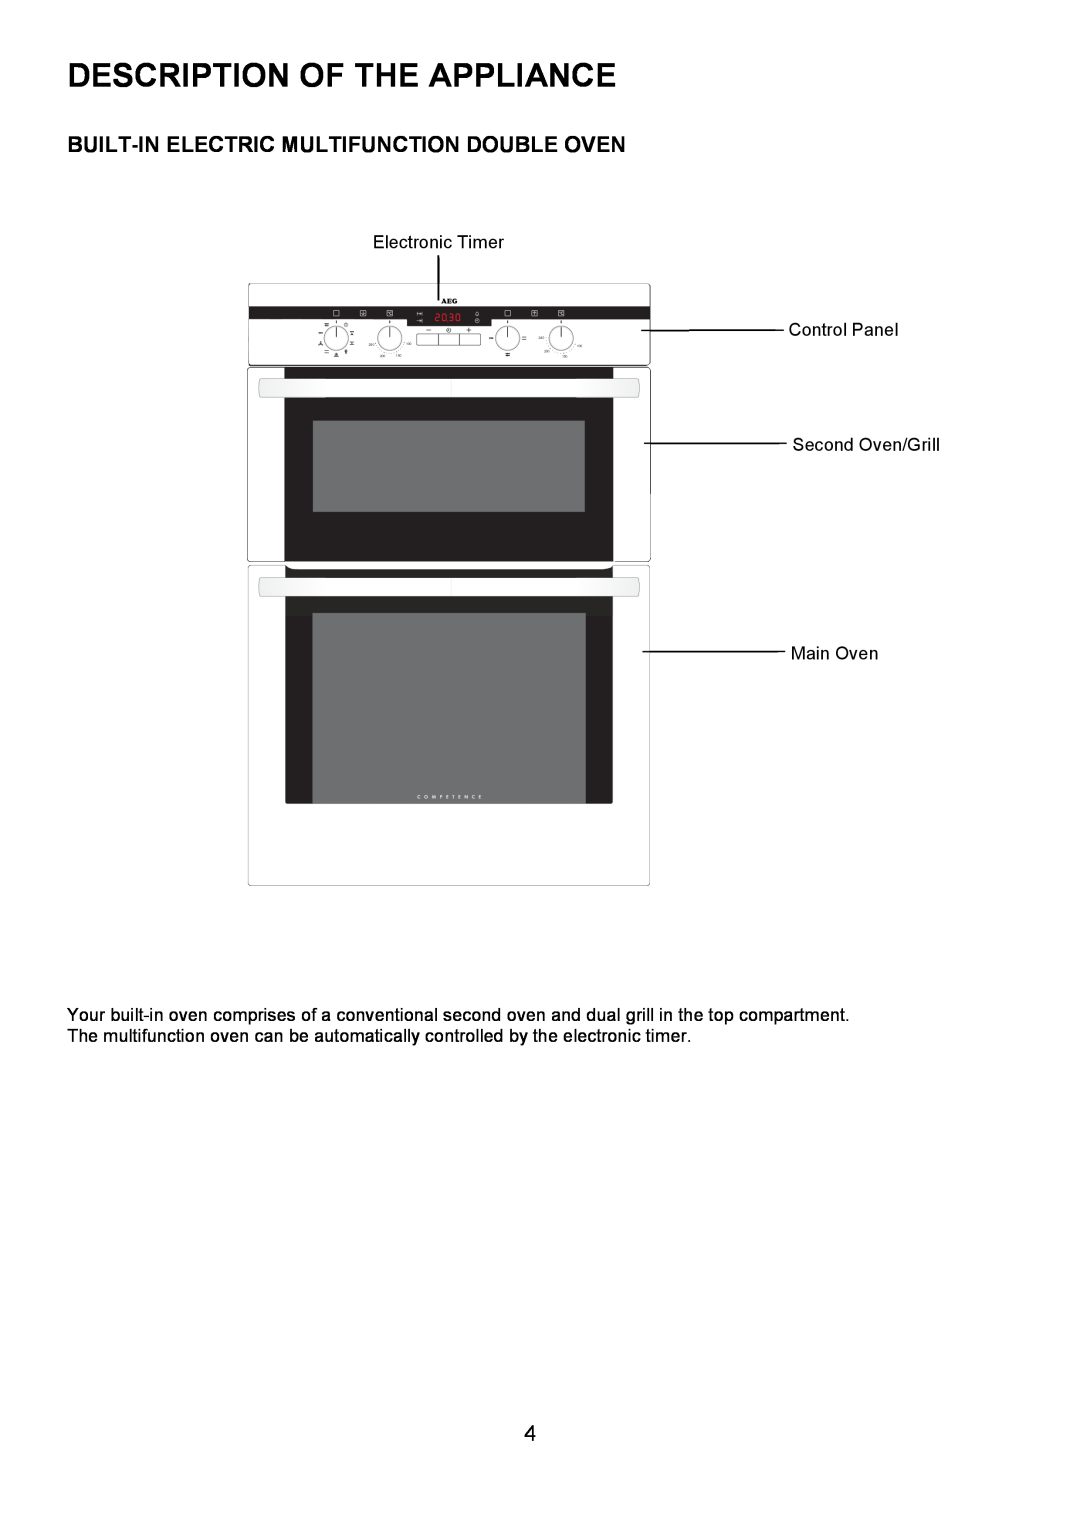 Electrolux D4101-4 Description Of The Appliance, Built-Inelectric Multifunction Double Oven, 240, 100 